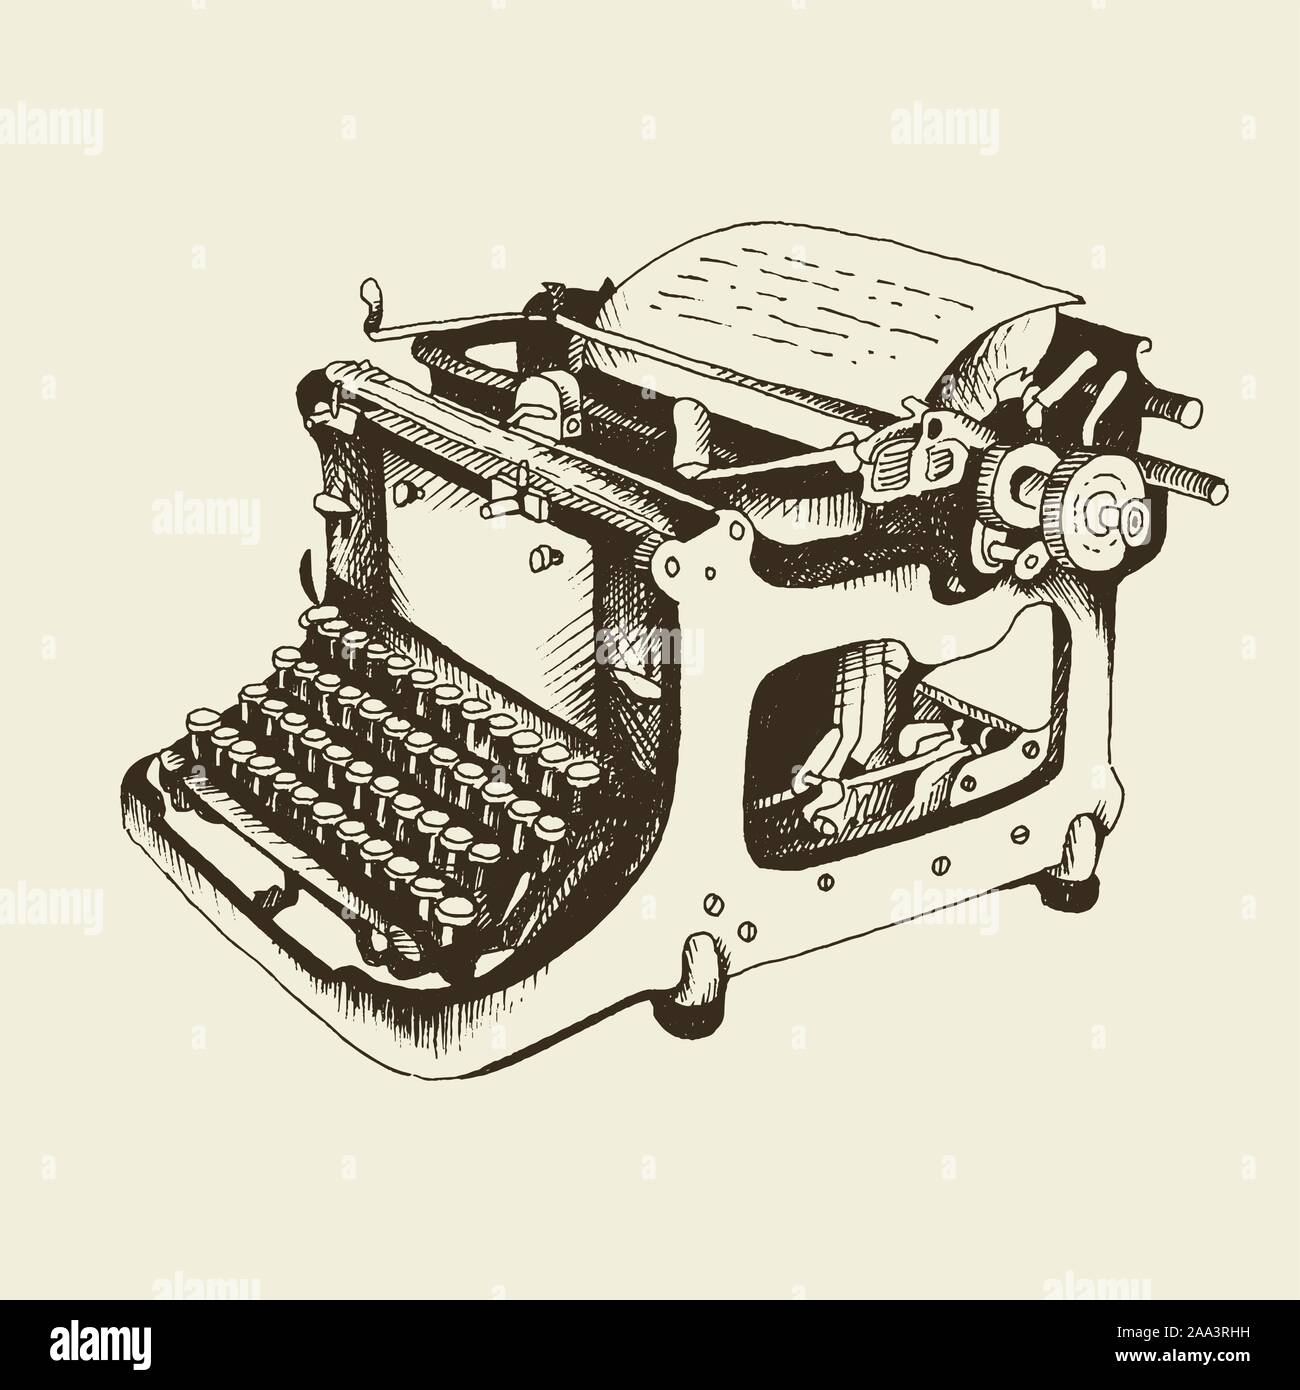 Typewriter vintage vector illustration, hand drawn sketch in engraving style isolated on beige background Stock Vector